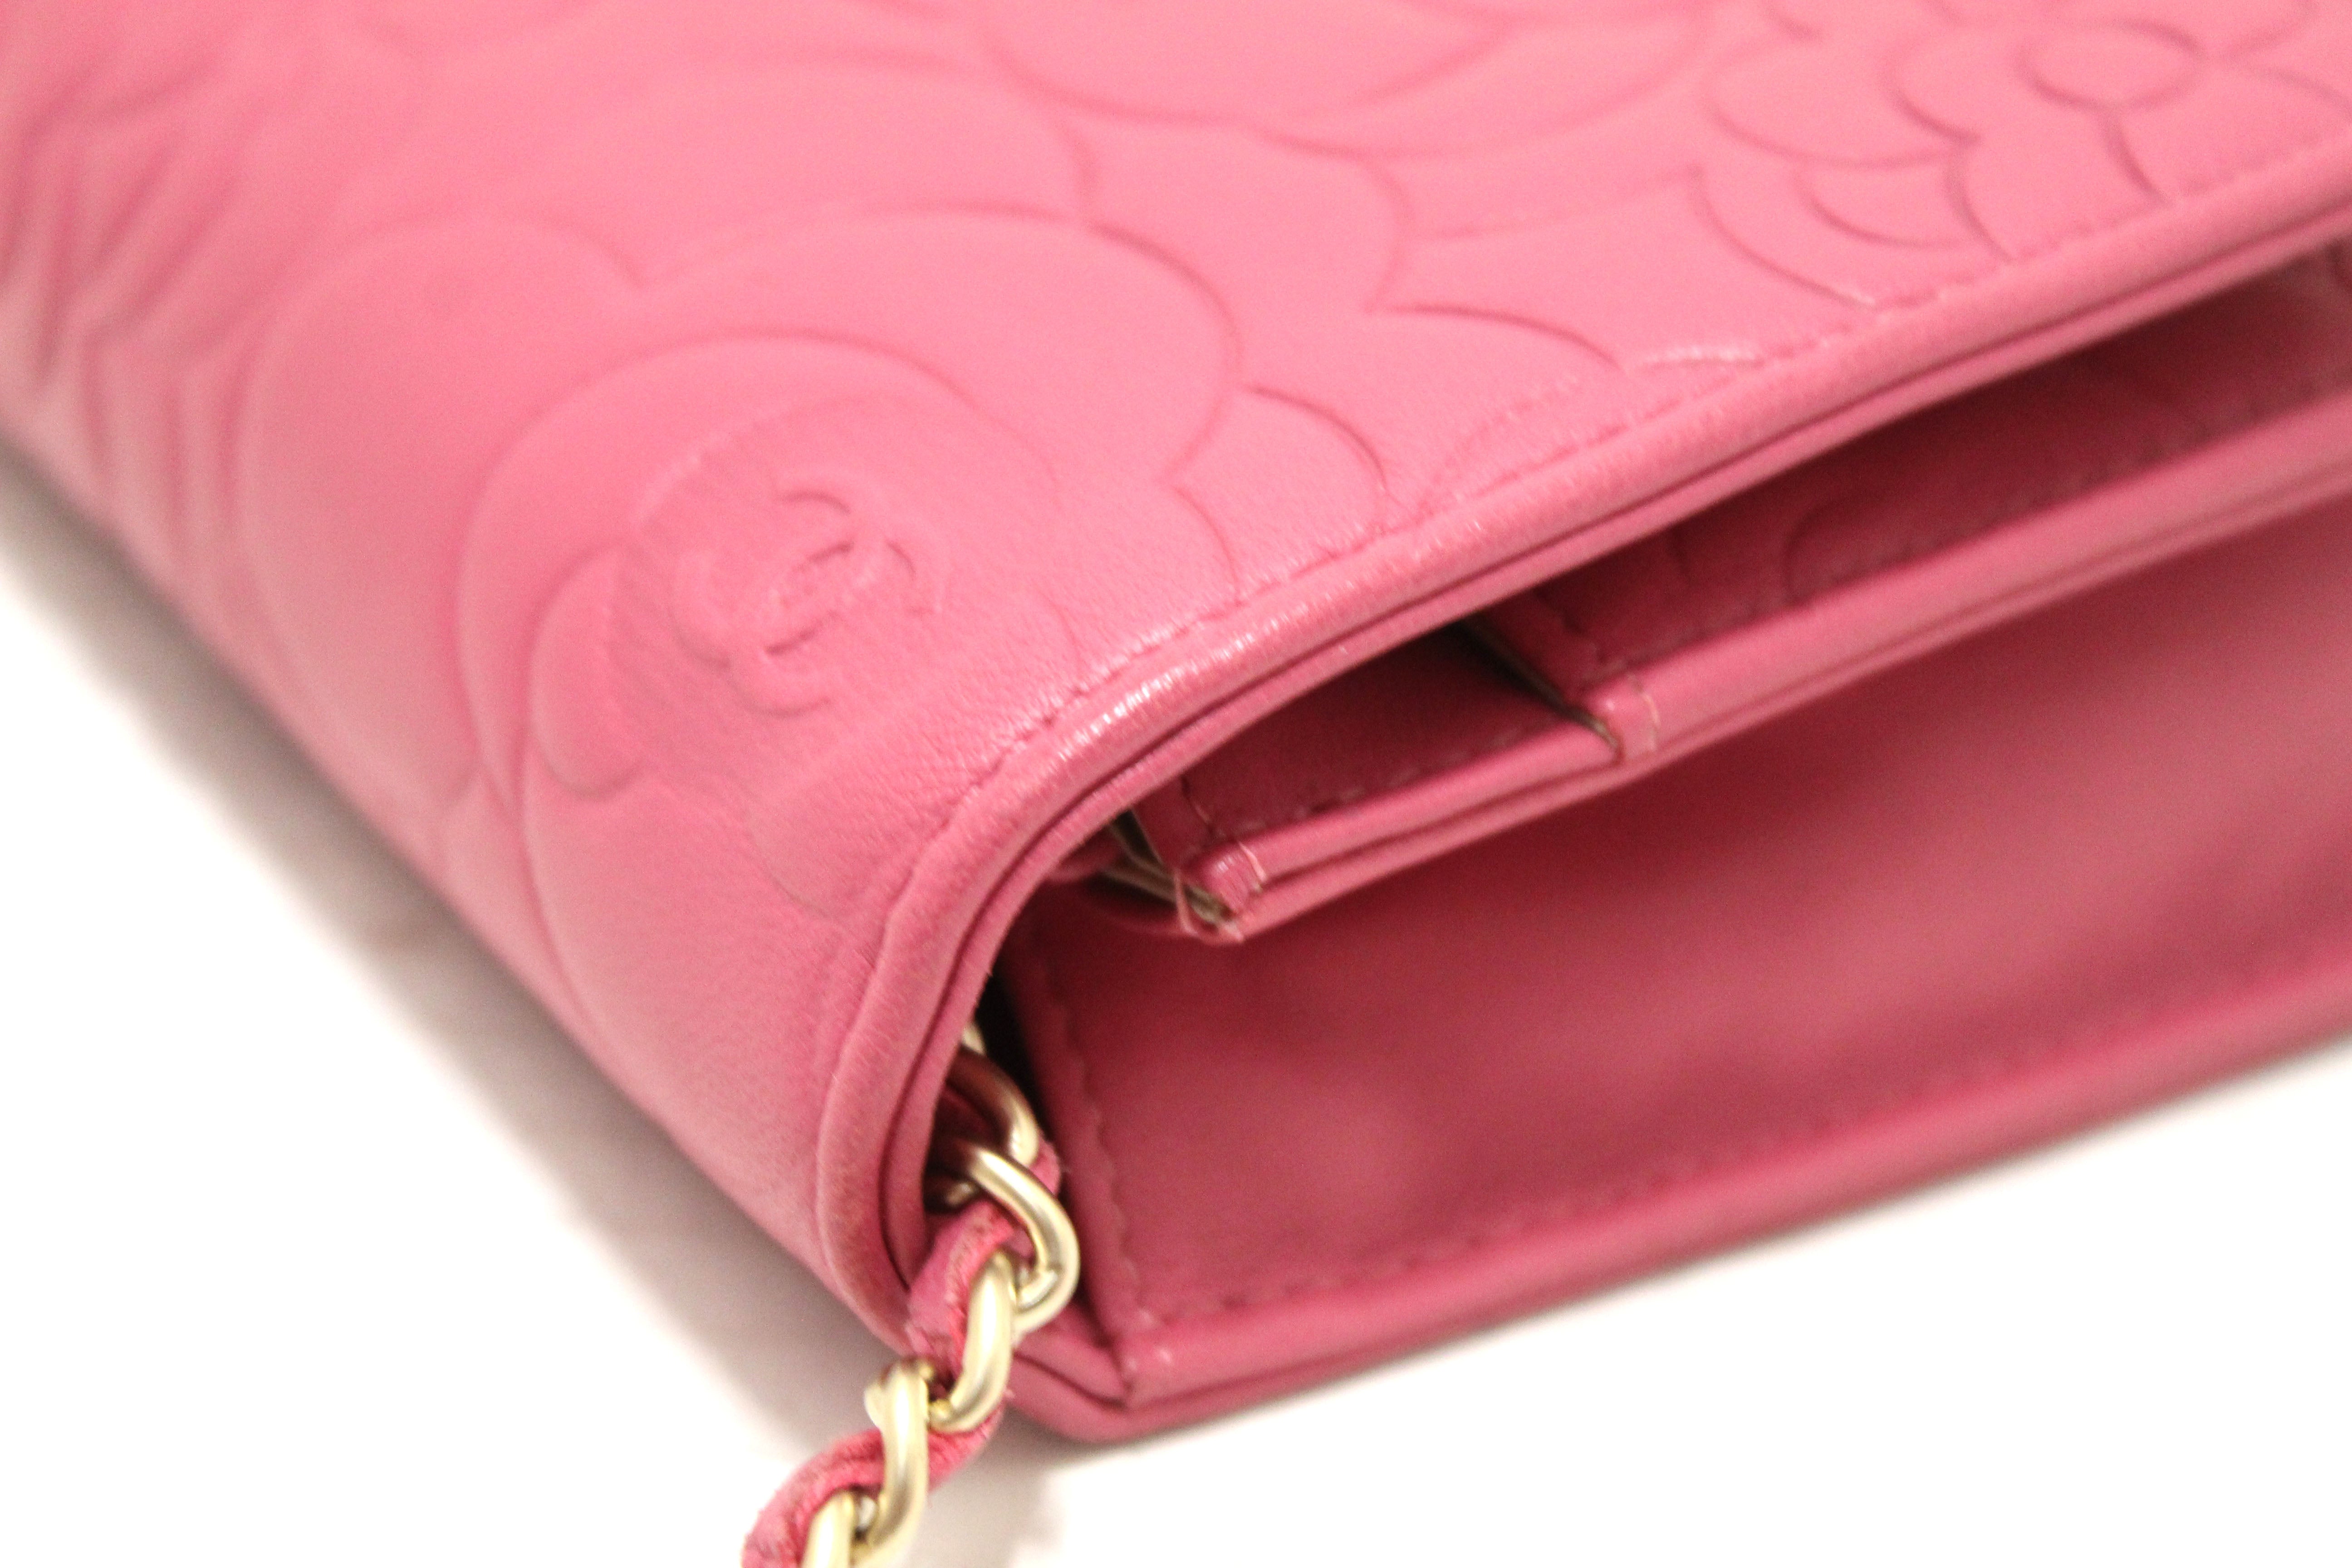 Chanel Camellia Lambskin Leather Wallet on Chain/Clutch Bag